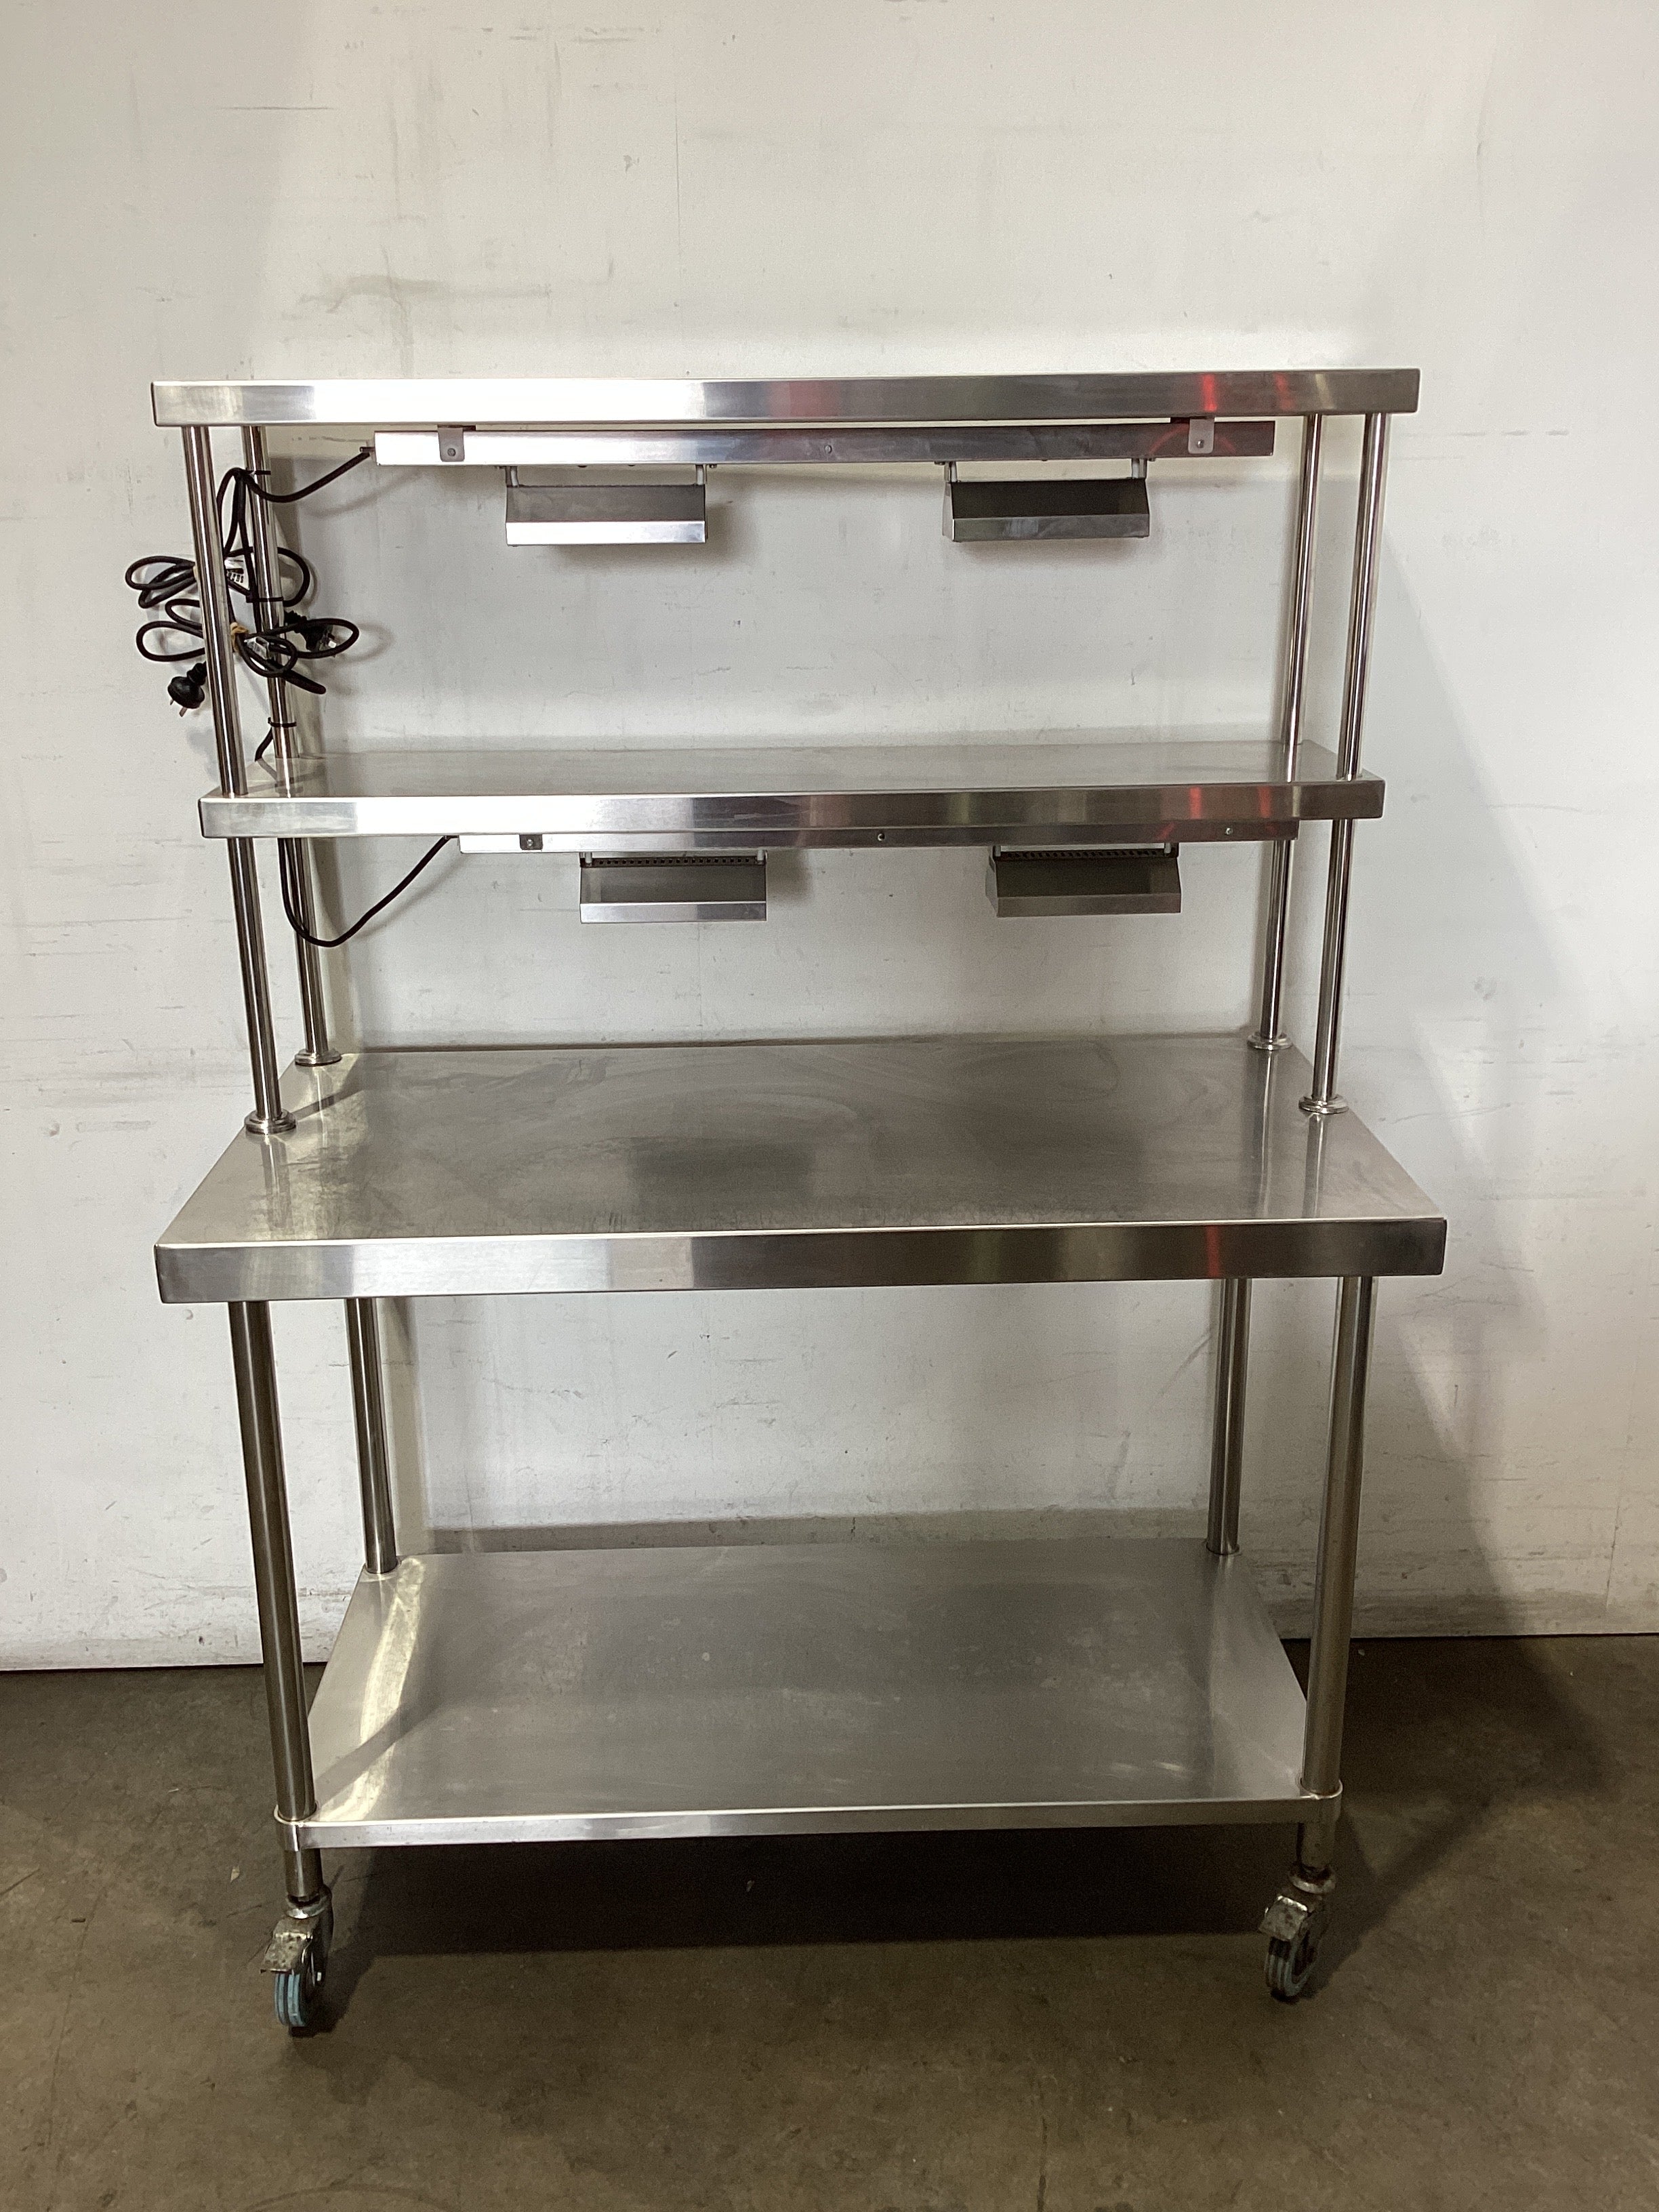 Thumbnail - Stainless Steel Bench With Gantry & Heat Lamps